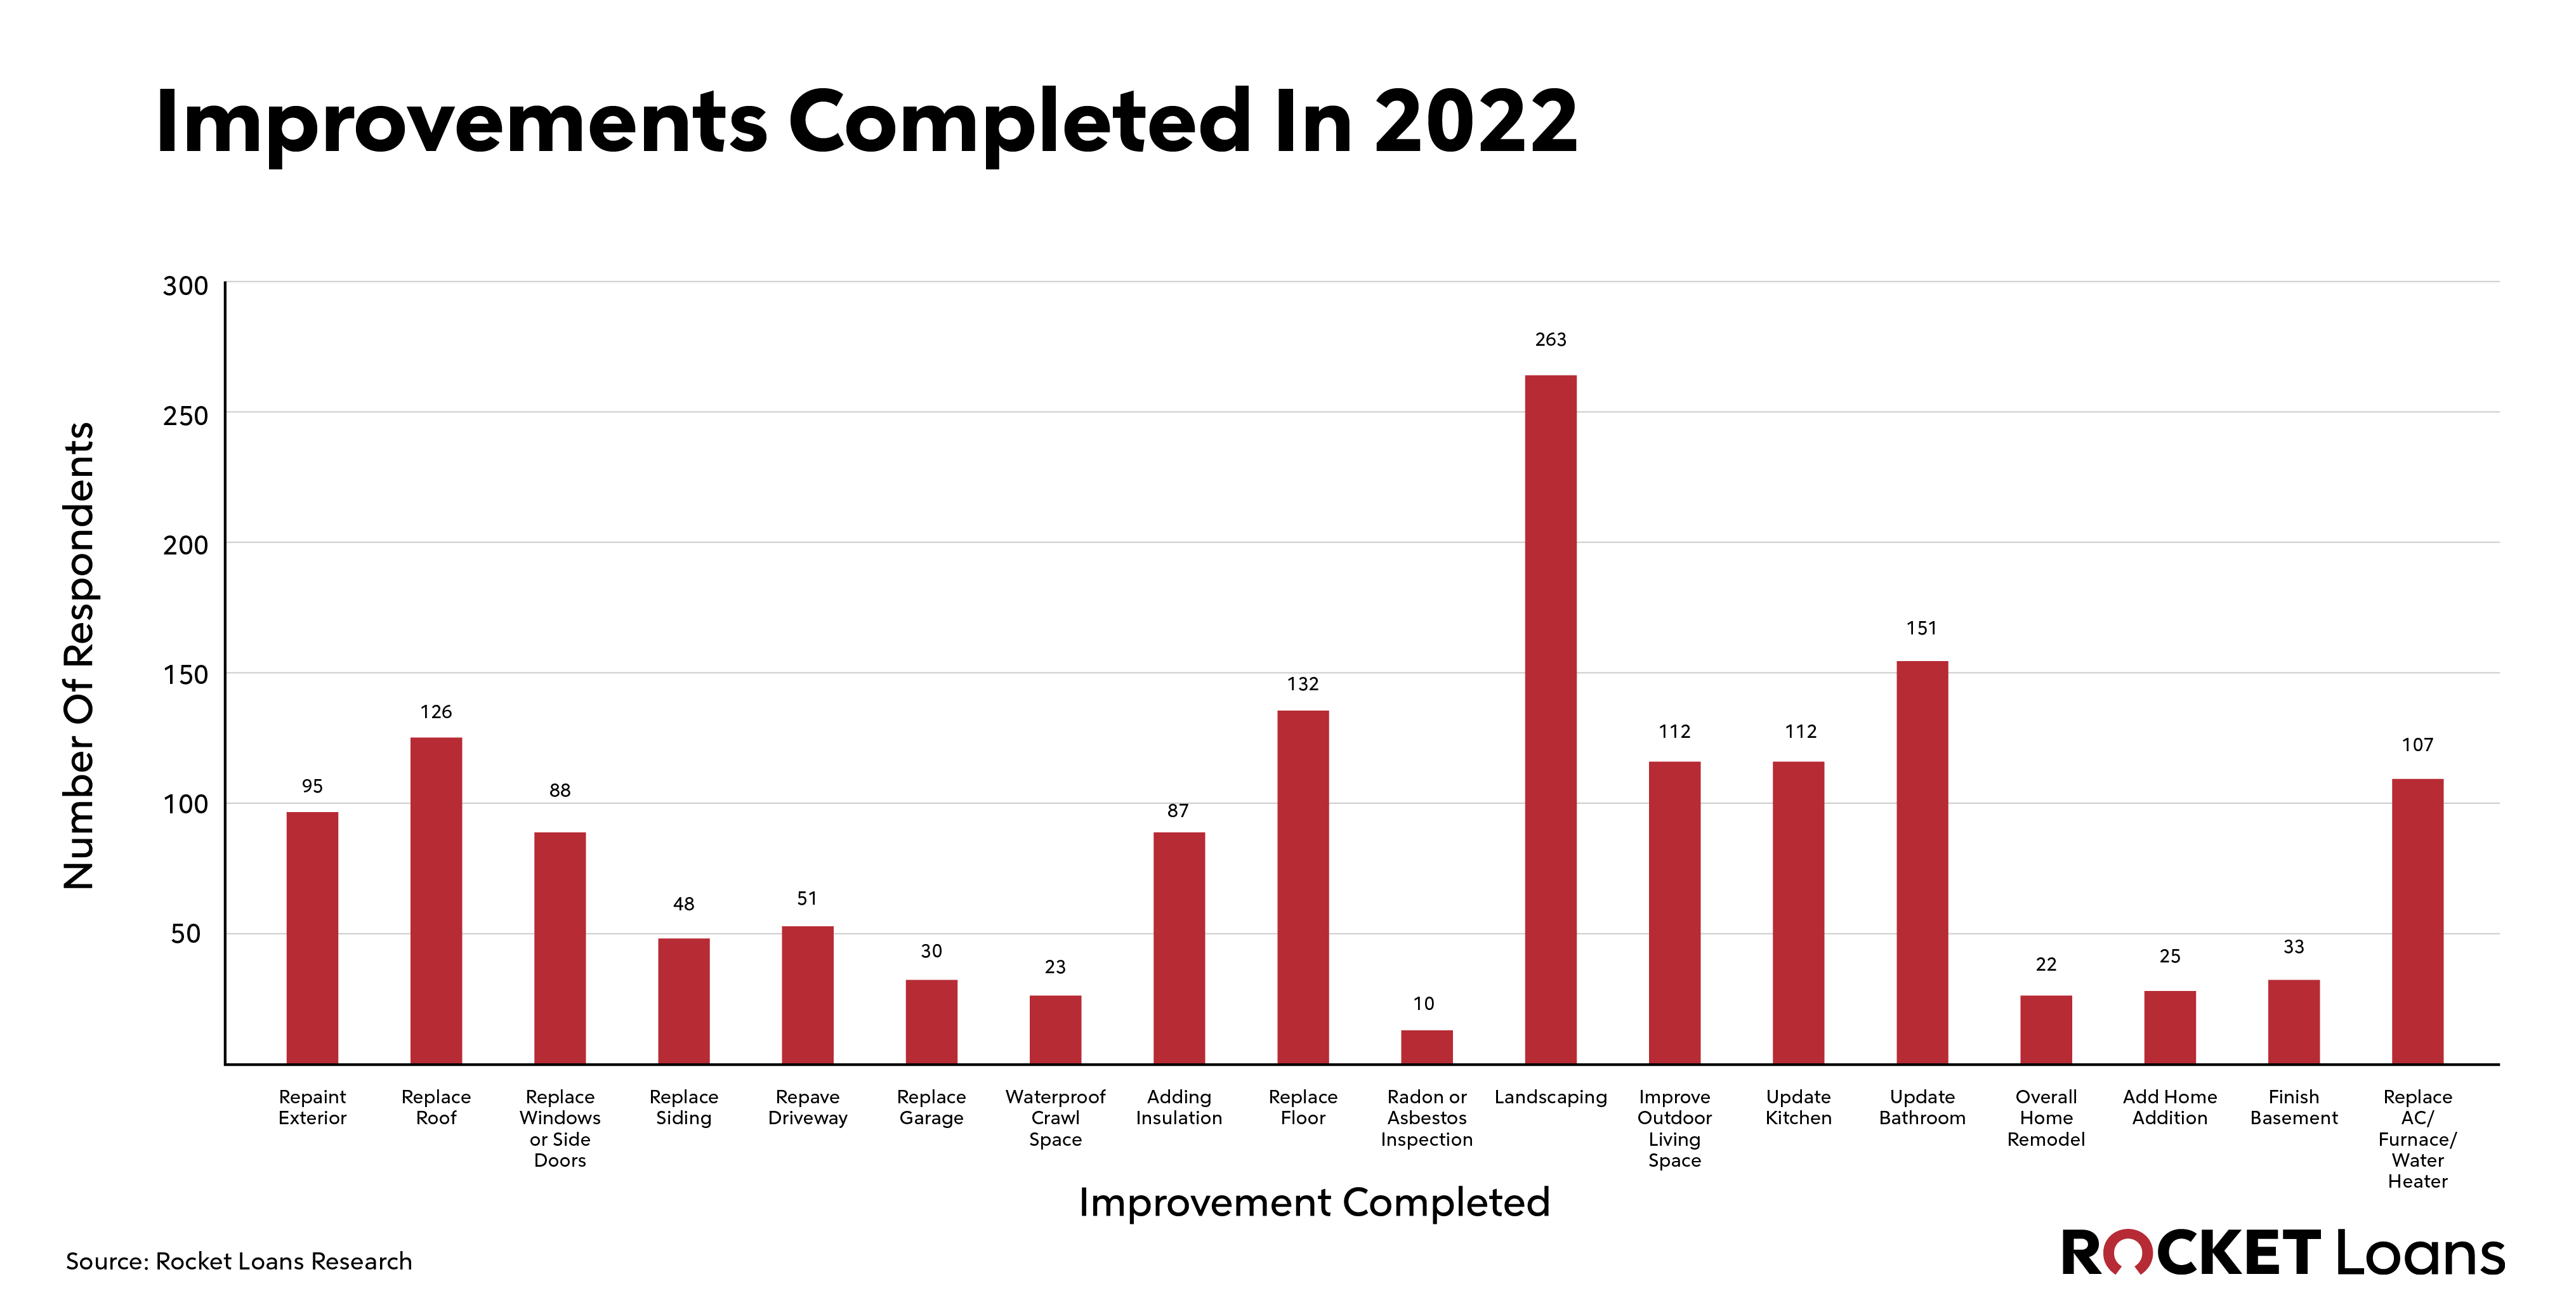 Chart showing Improvements completed in 2022.